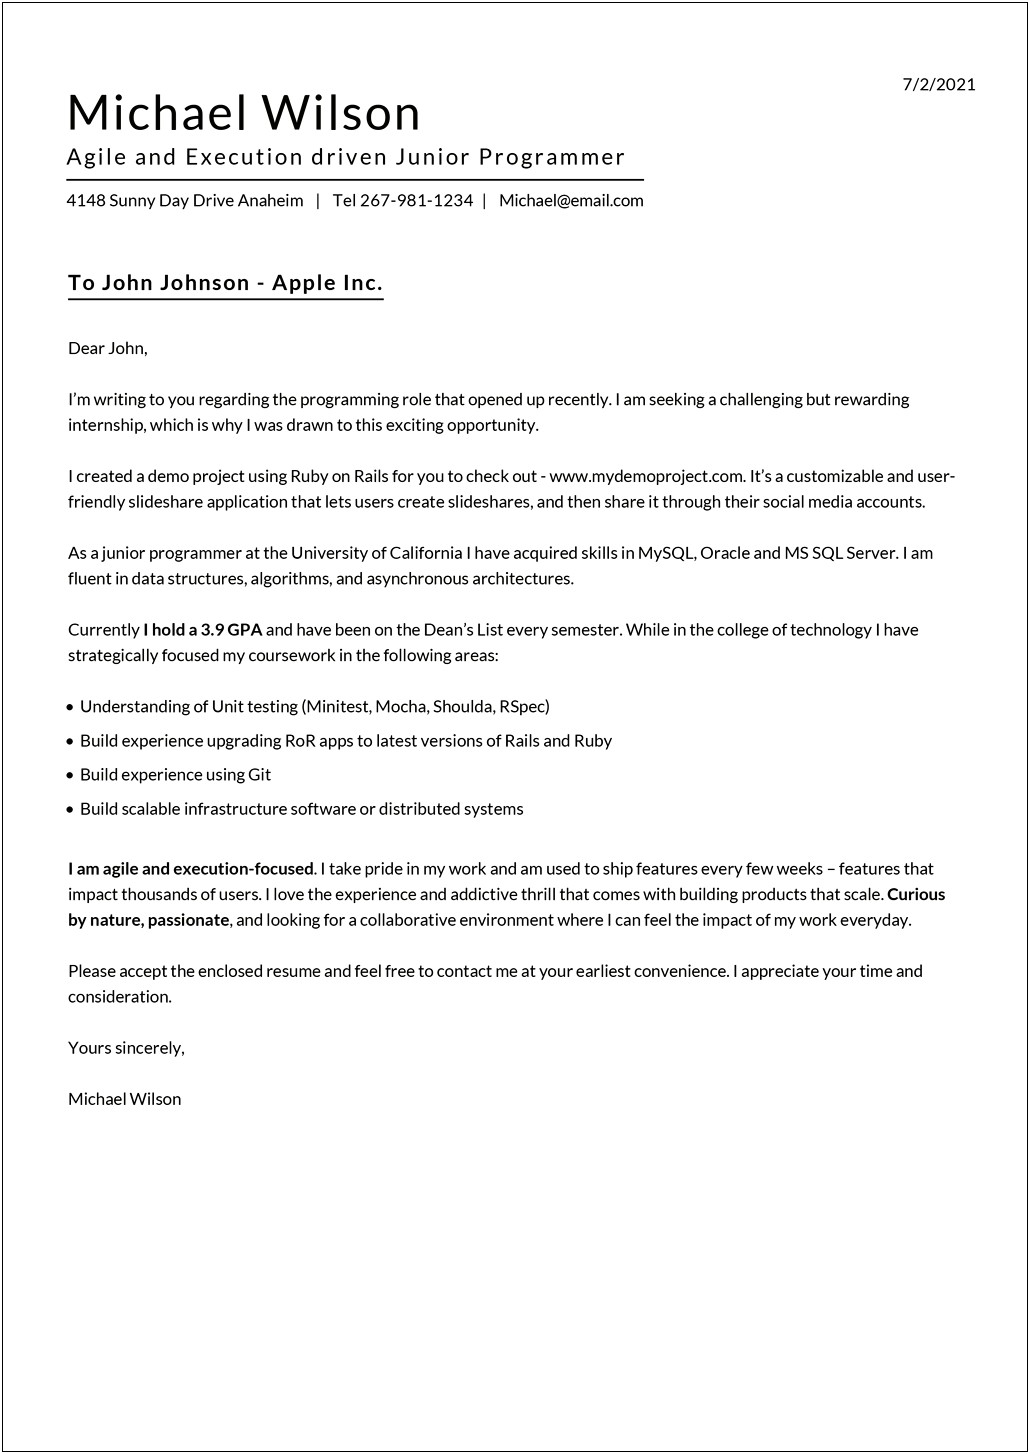 Email Cover Letter For Resume Format